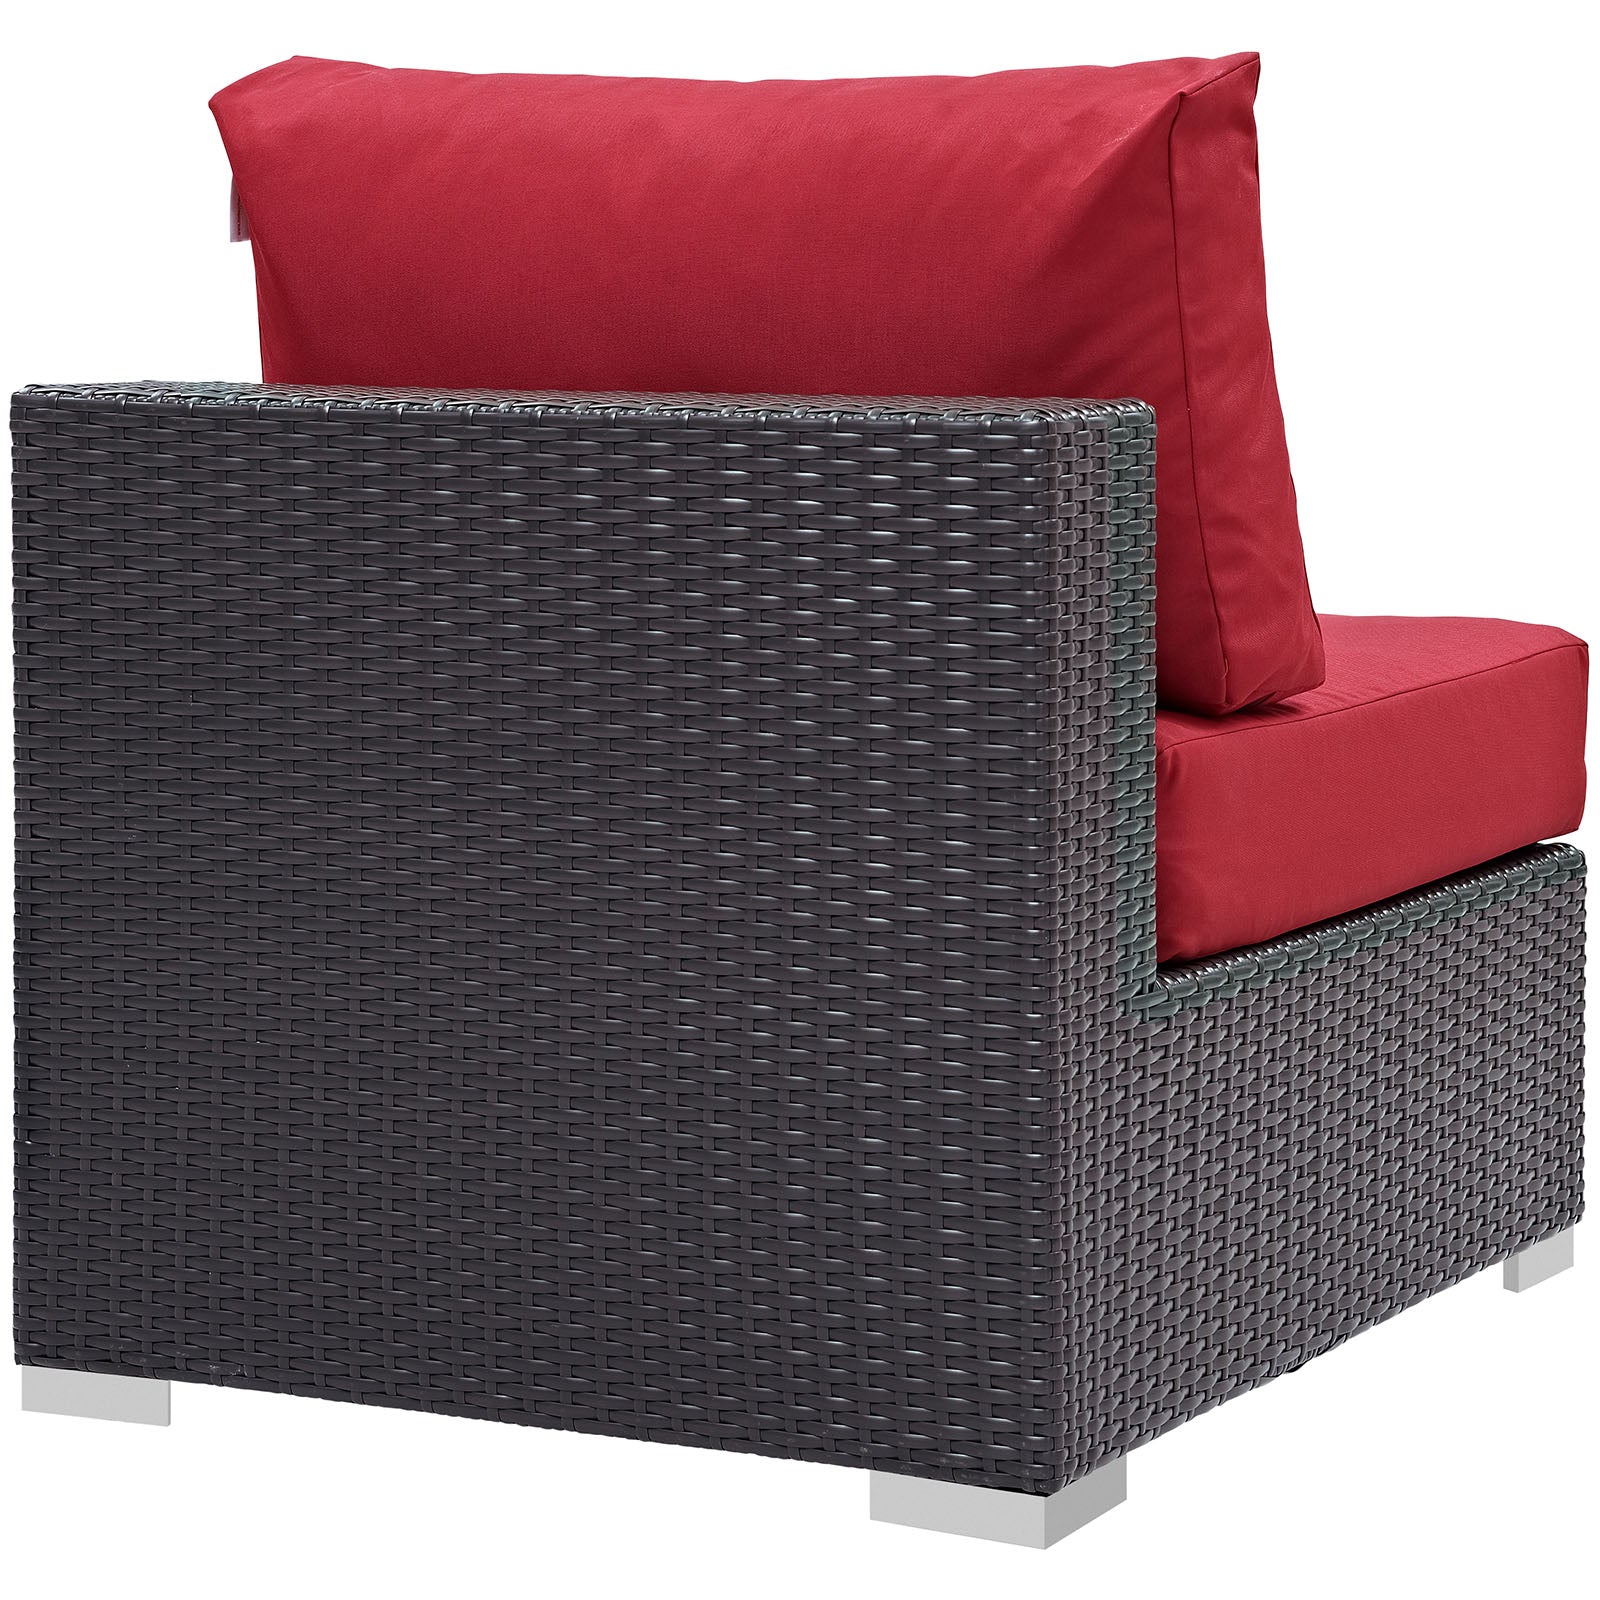 Modway Outdoor Chairs - Convene Outdoor Patio Armless Chair Espresso & Red